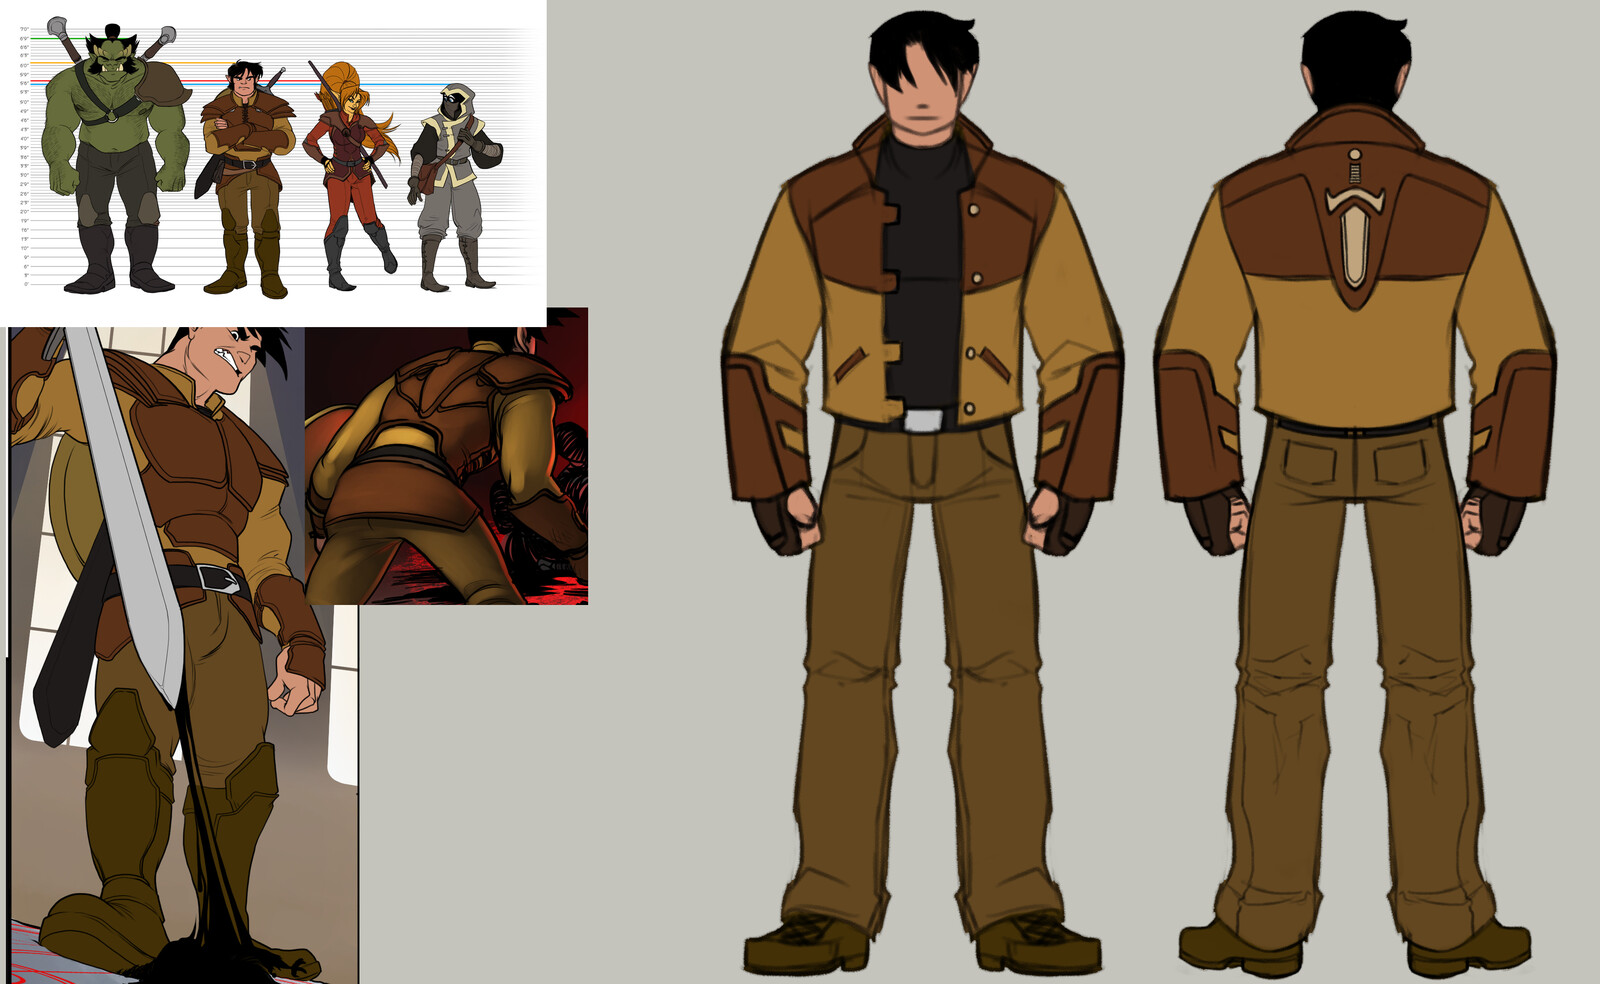 Brent's clothes and armor "modernized"